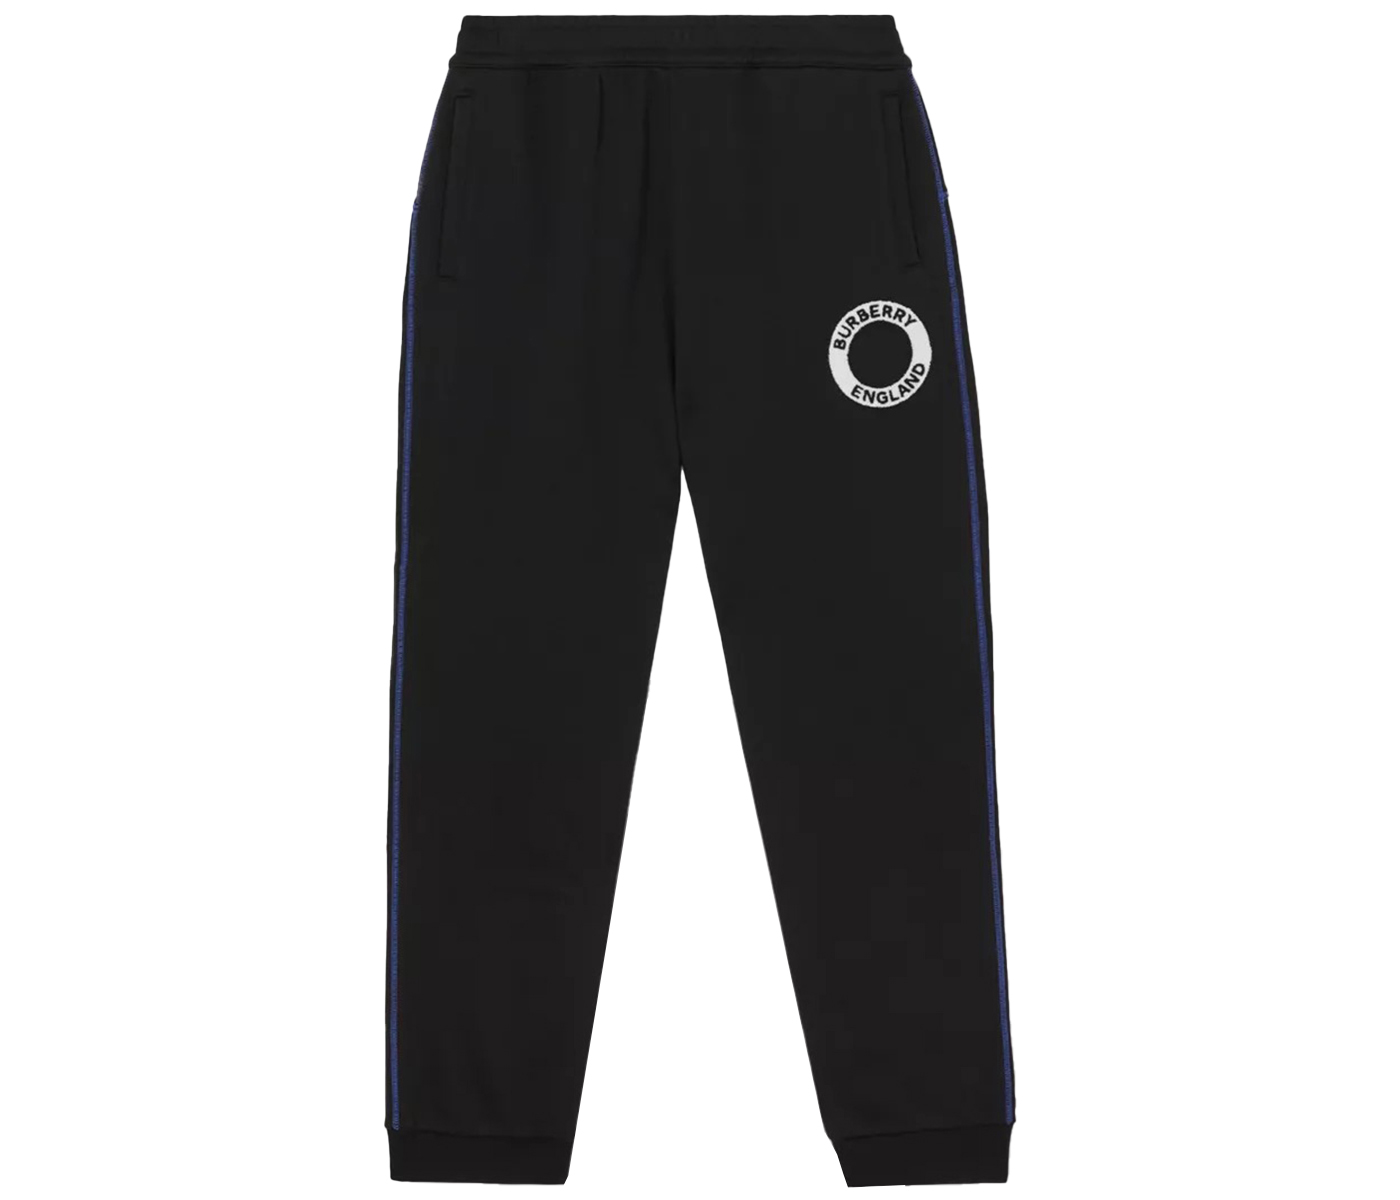 Dolce & Gabbana Cotton Jogging Pants Roma with Heart, Crown and Logo Black  | FASHION ROOMS